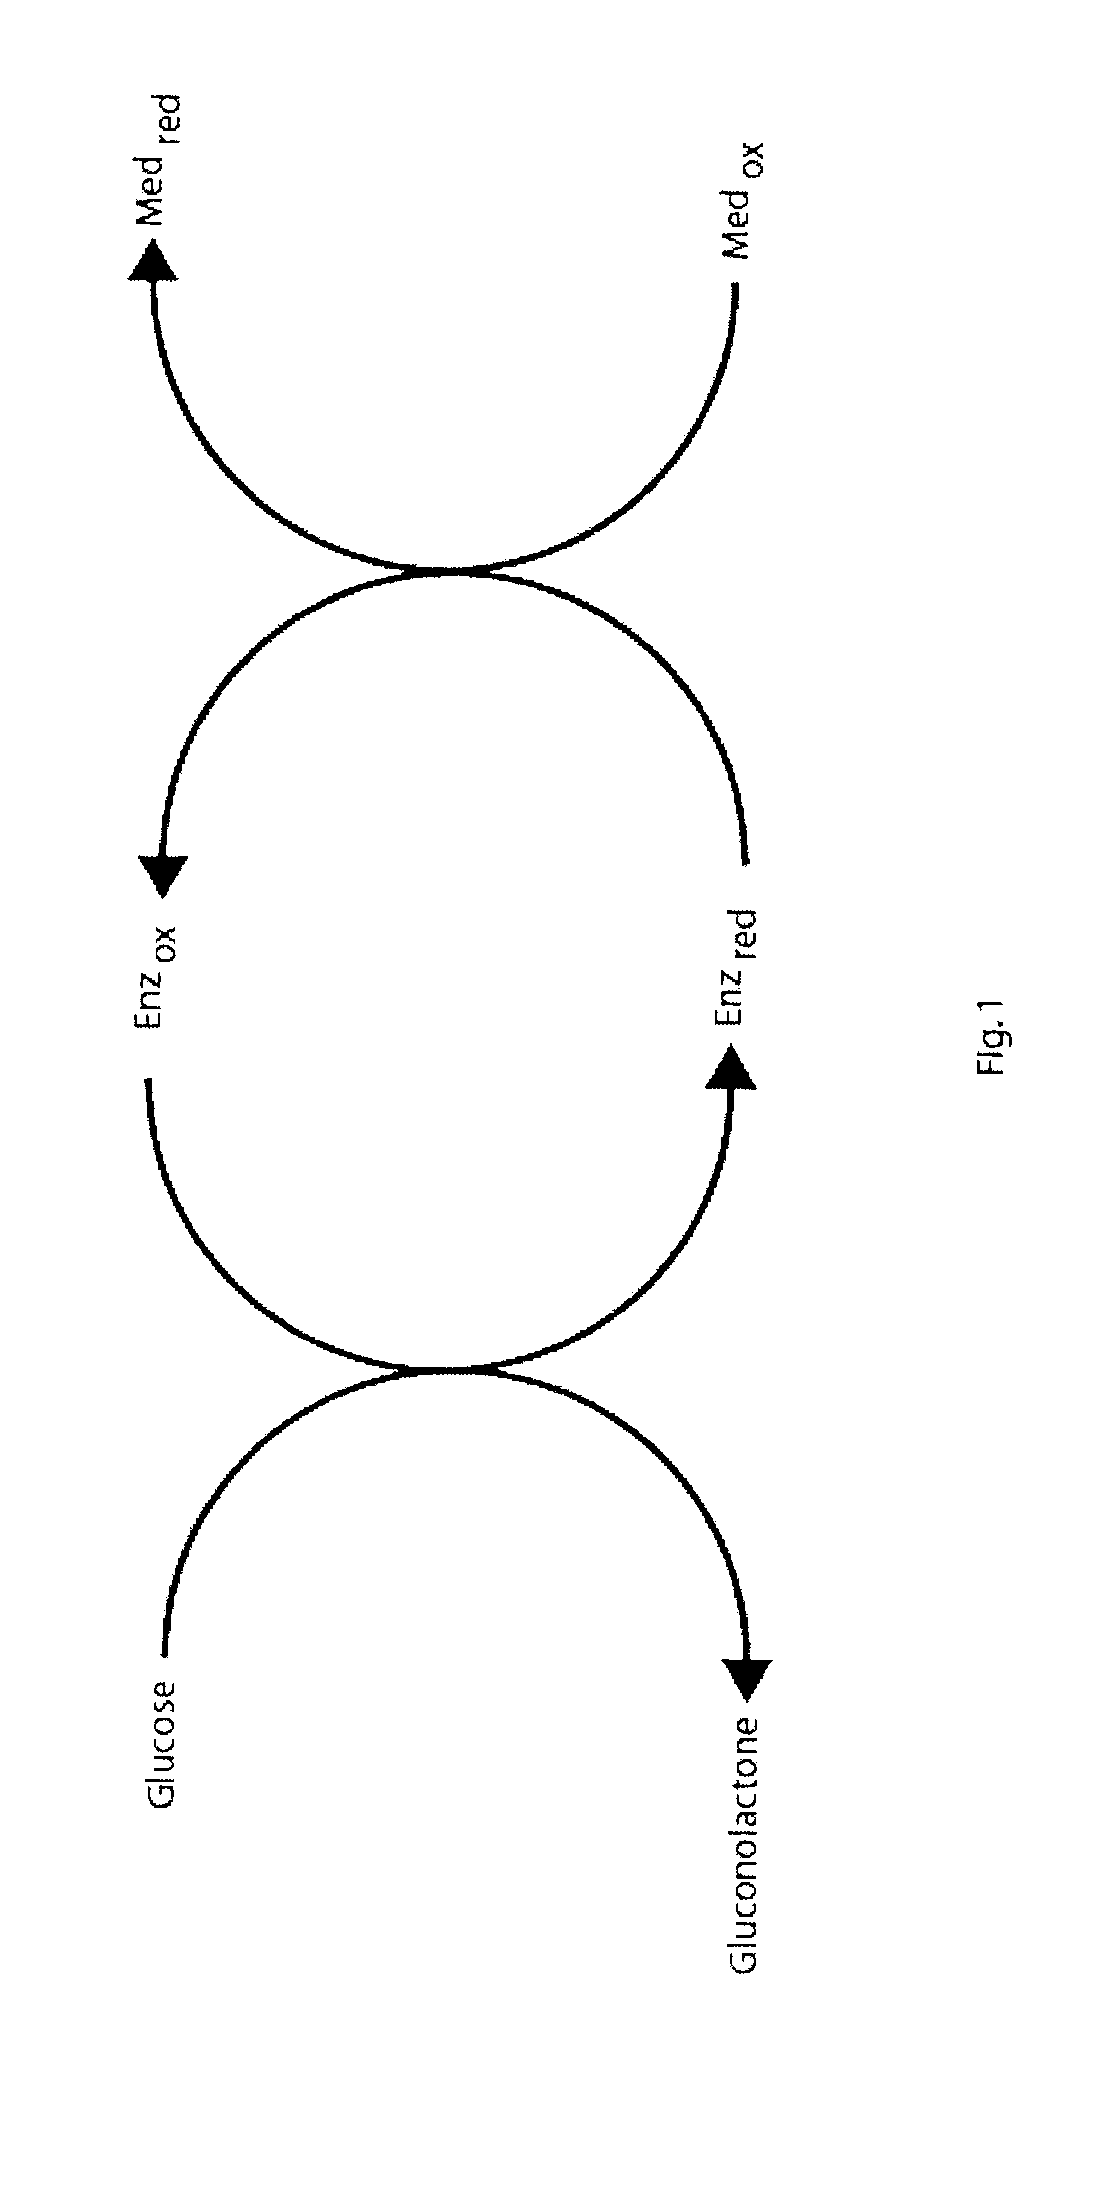 Method and Apparatus for Detection of Abnormal Traces during Electrochemical Analyte Detection